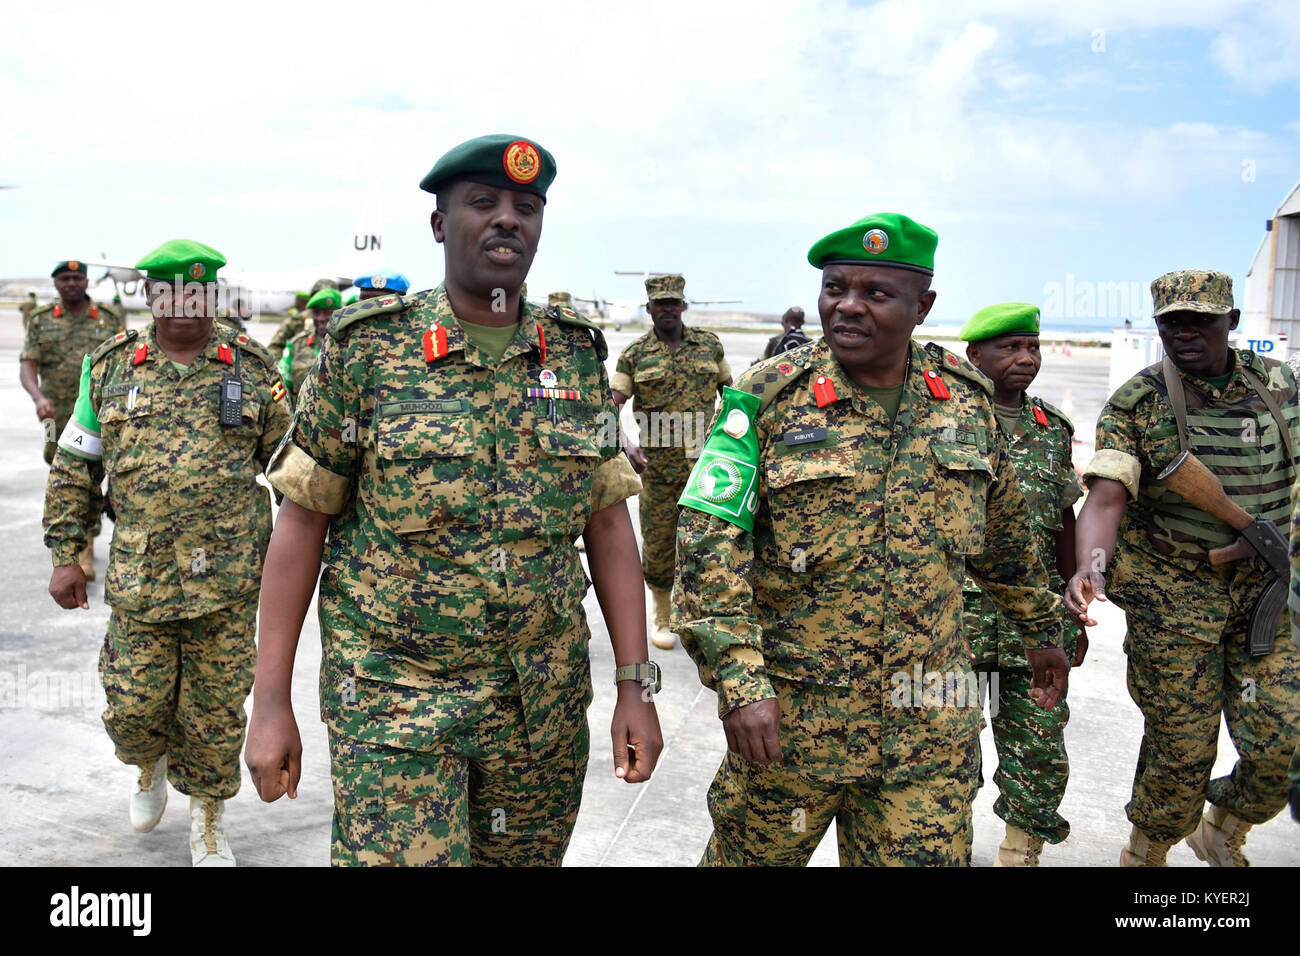 The Chief of Defense Forces (CDF), of the Uganda People’s Defence Force Gen David Muhoozi being received by senior officers of the Ugandan contingent serving under the African Union Mission in Somalia. This was upon his arrival on official visit in Mogadishu, Somalia on 15 August 2017/AMISOM Photo Stock Photo